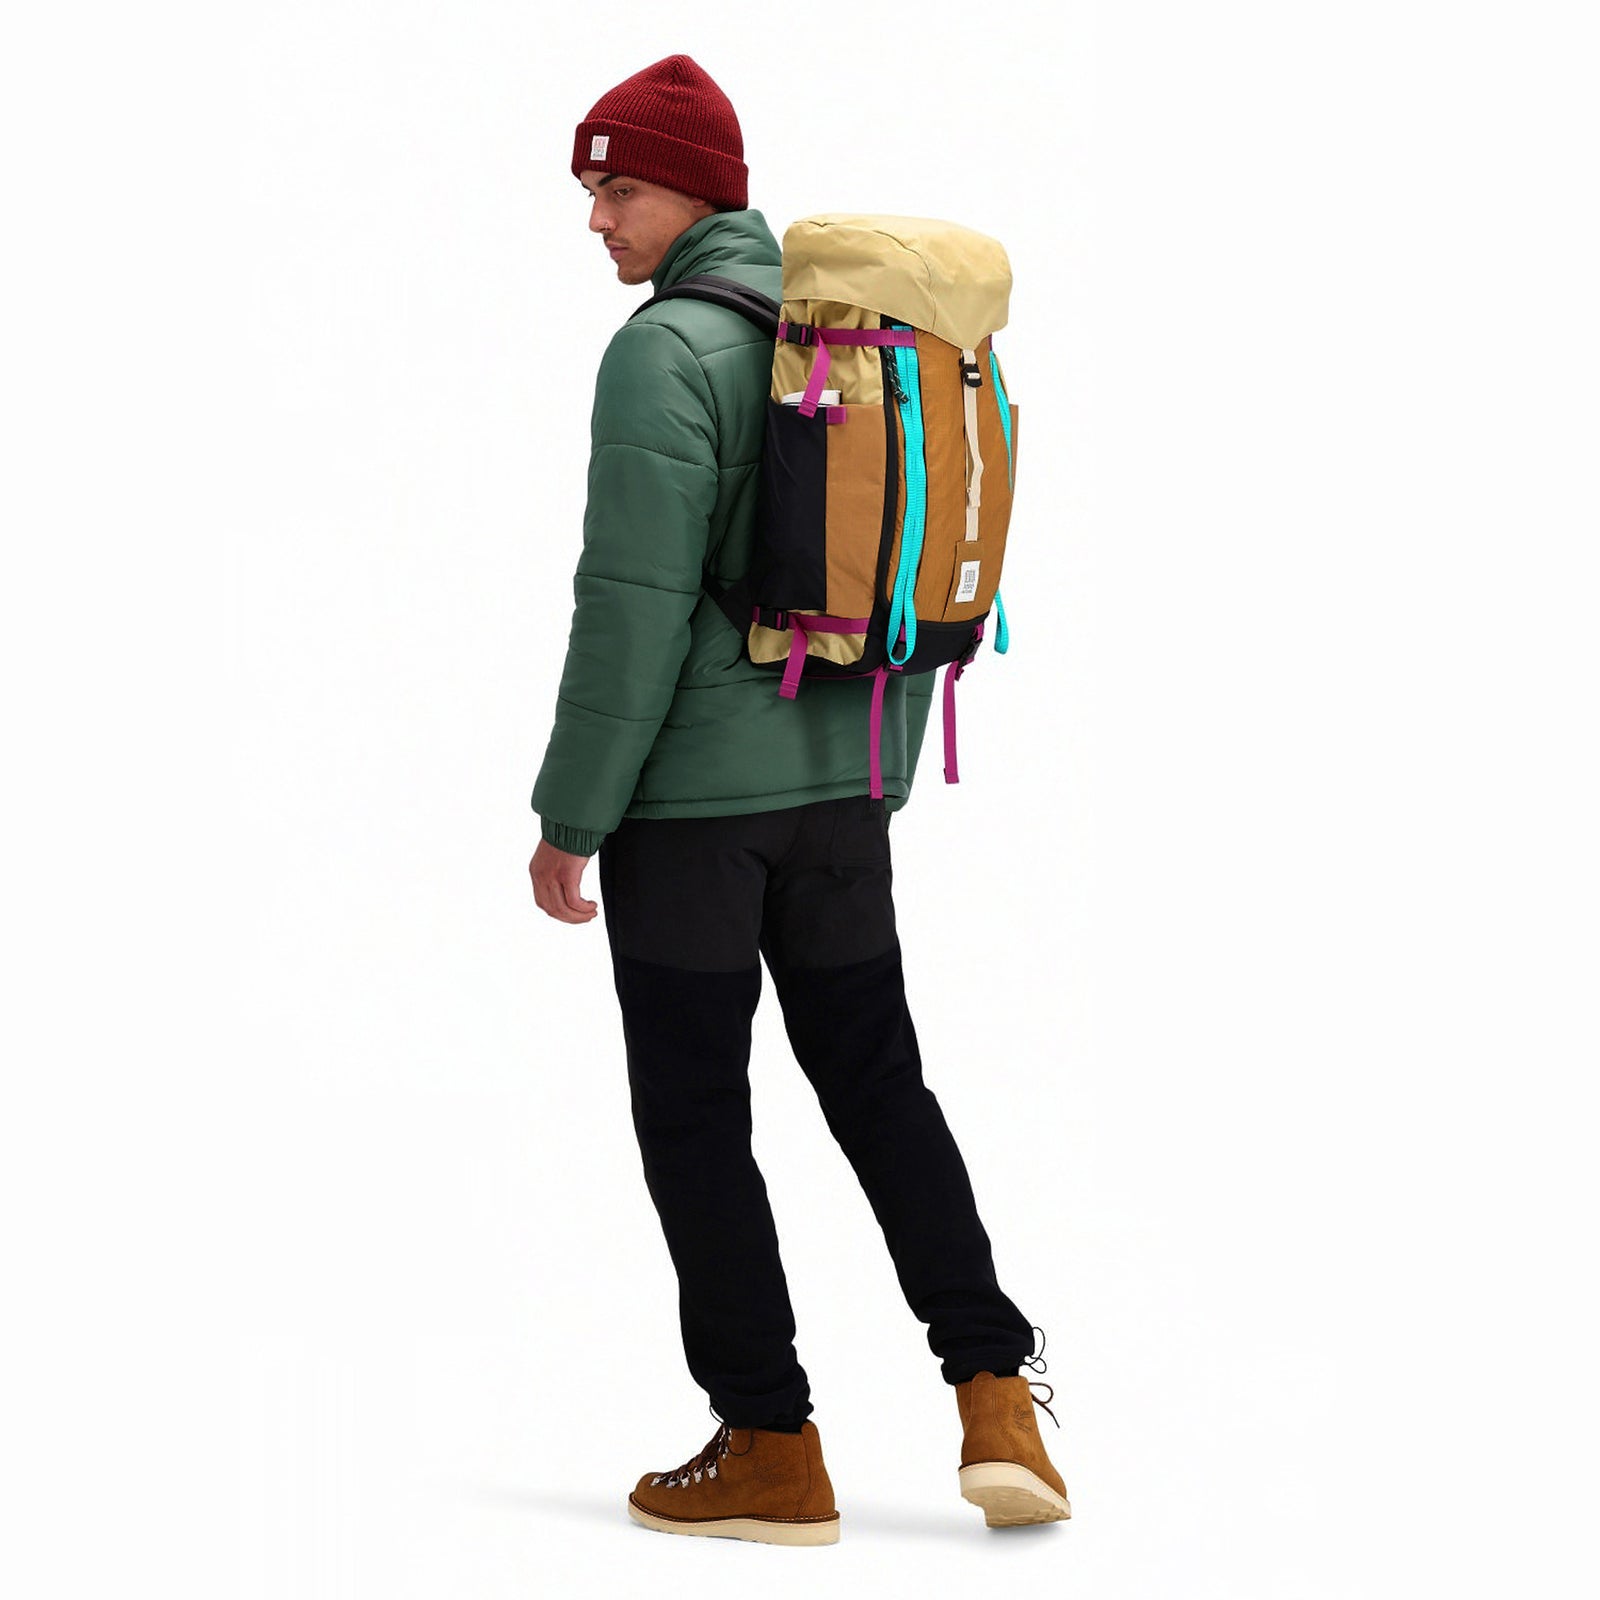 Model wearing Topo Designs Mountain Pack 28L hiking backpack with external laptop sleeve access in lightweight recycled "hemp / bone brown" nylon. 